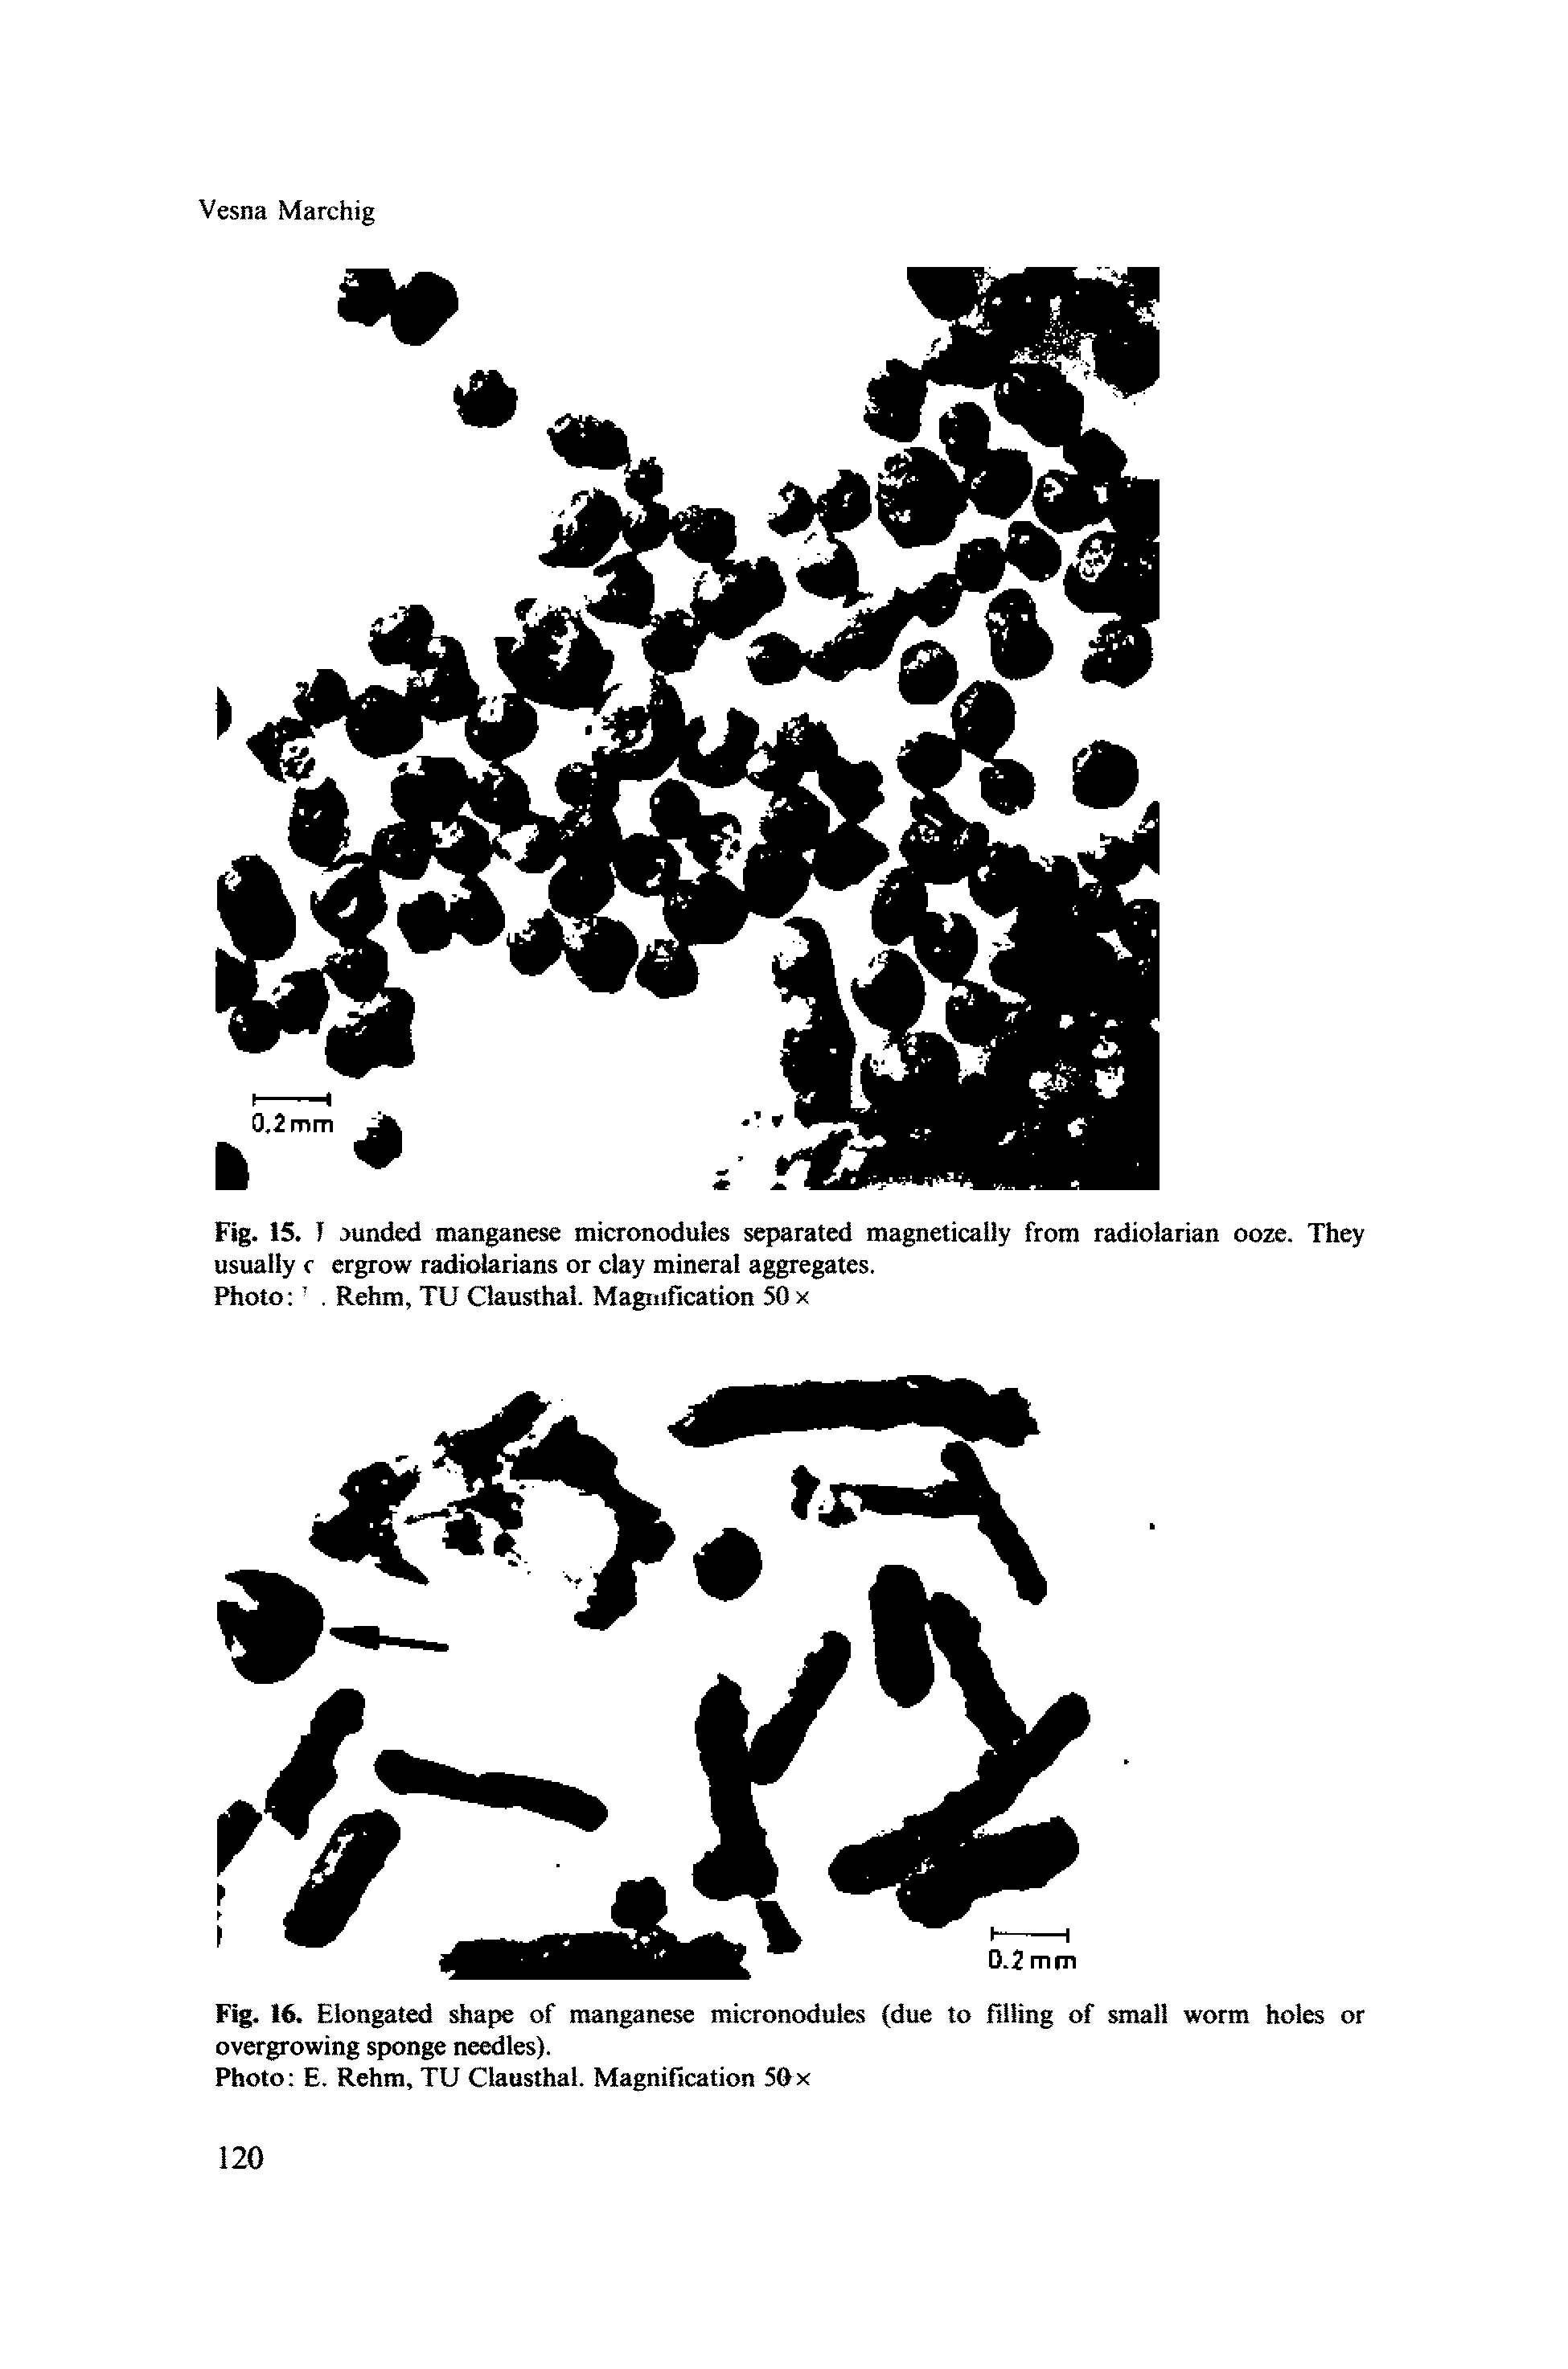 Fig. 16. Elongated shape of manganese micronodules (due to filling of small worm holes or overgrowing sponge needles).